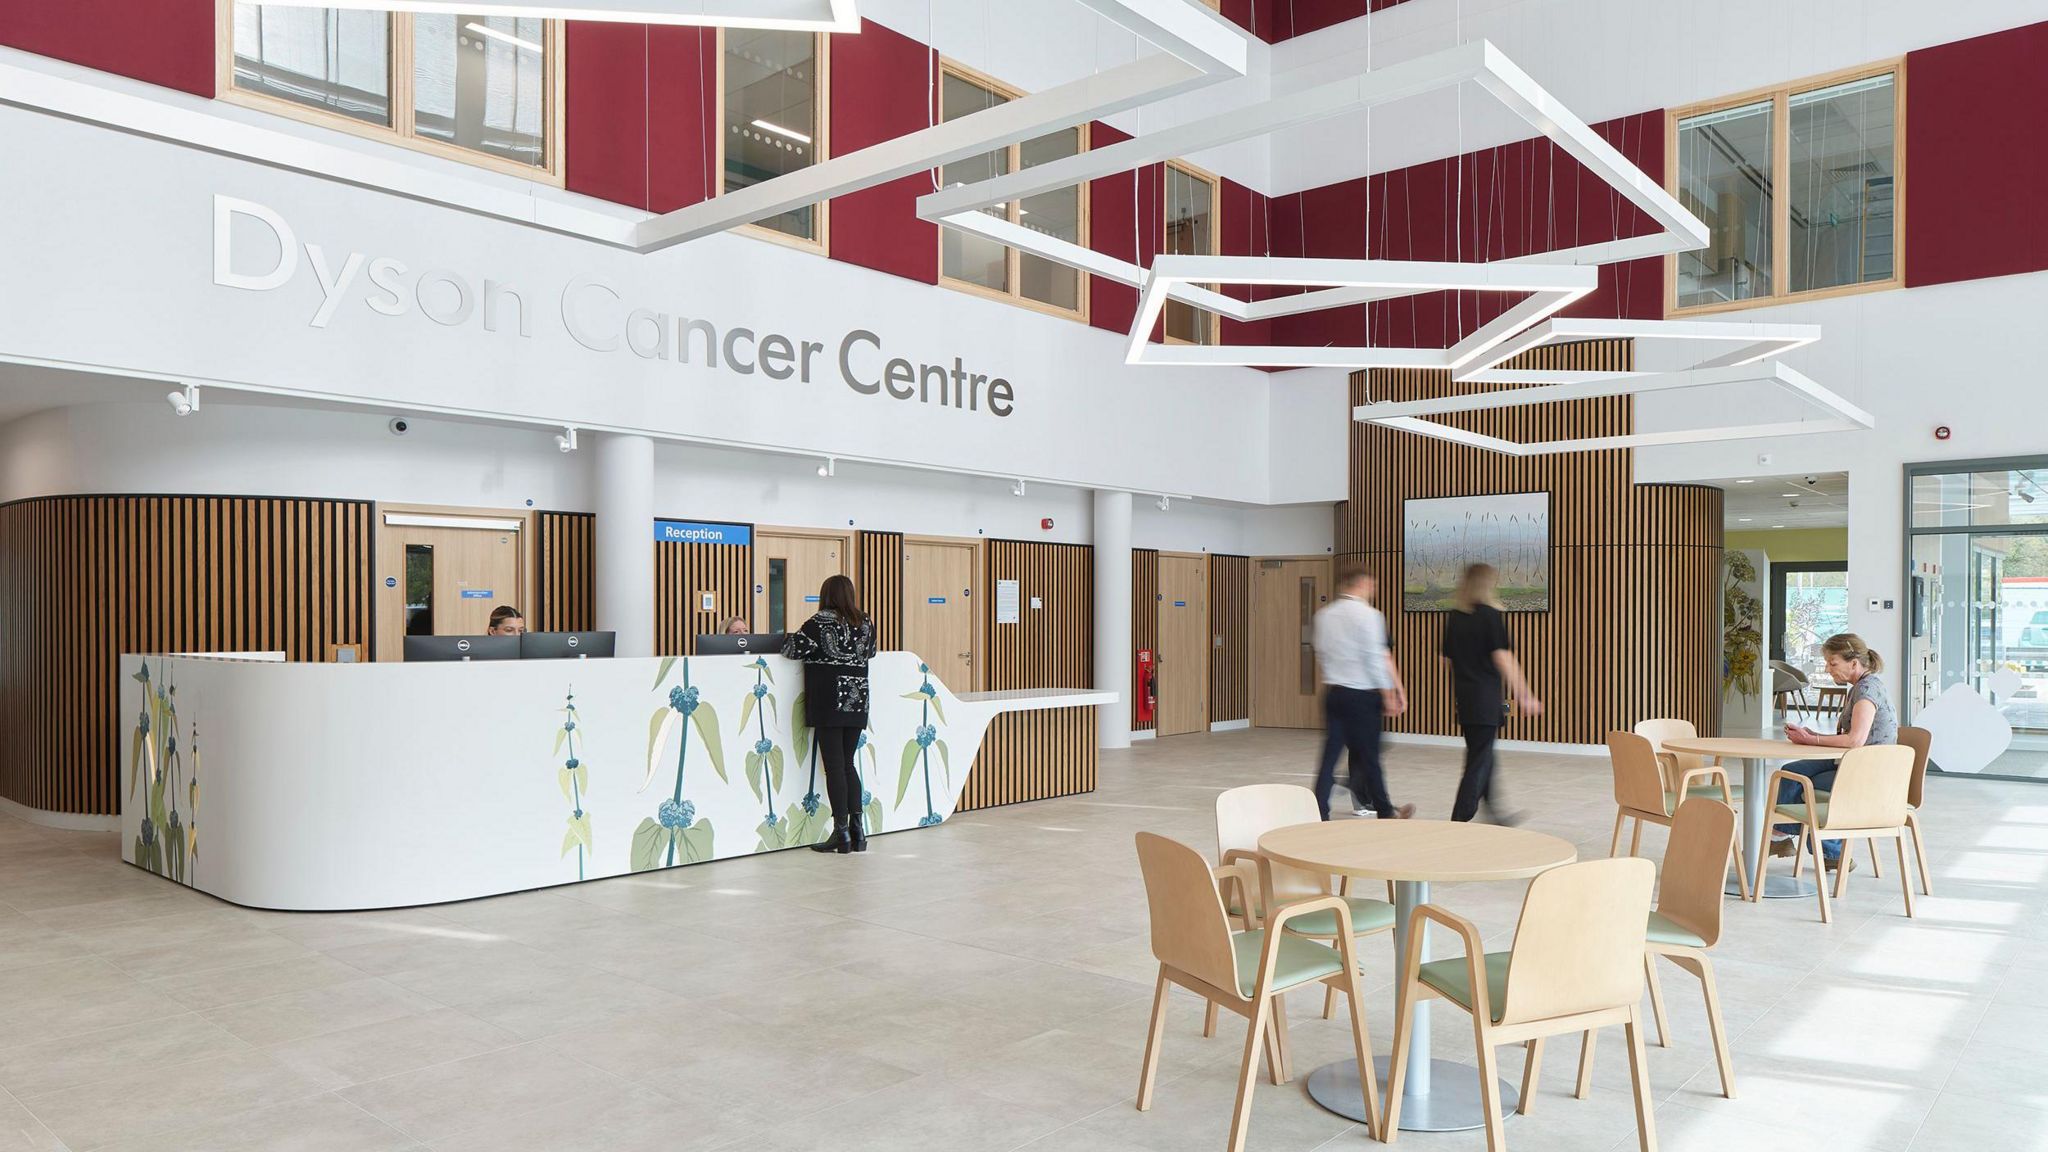 Dyson cancer centre officially welcomes in patients